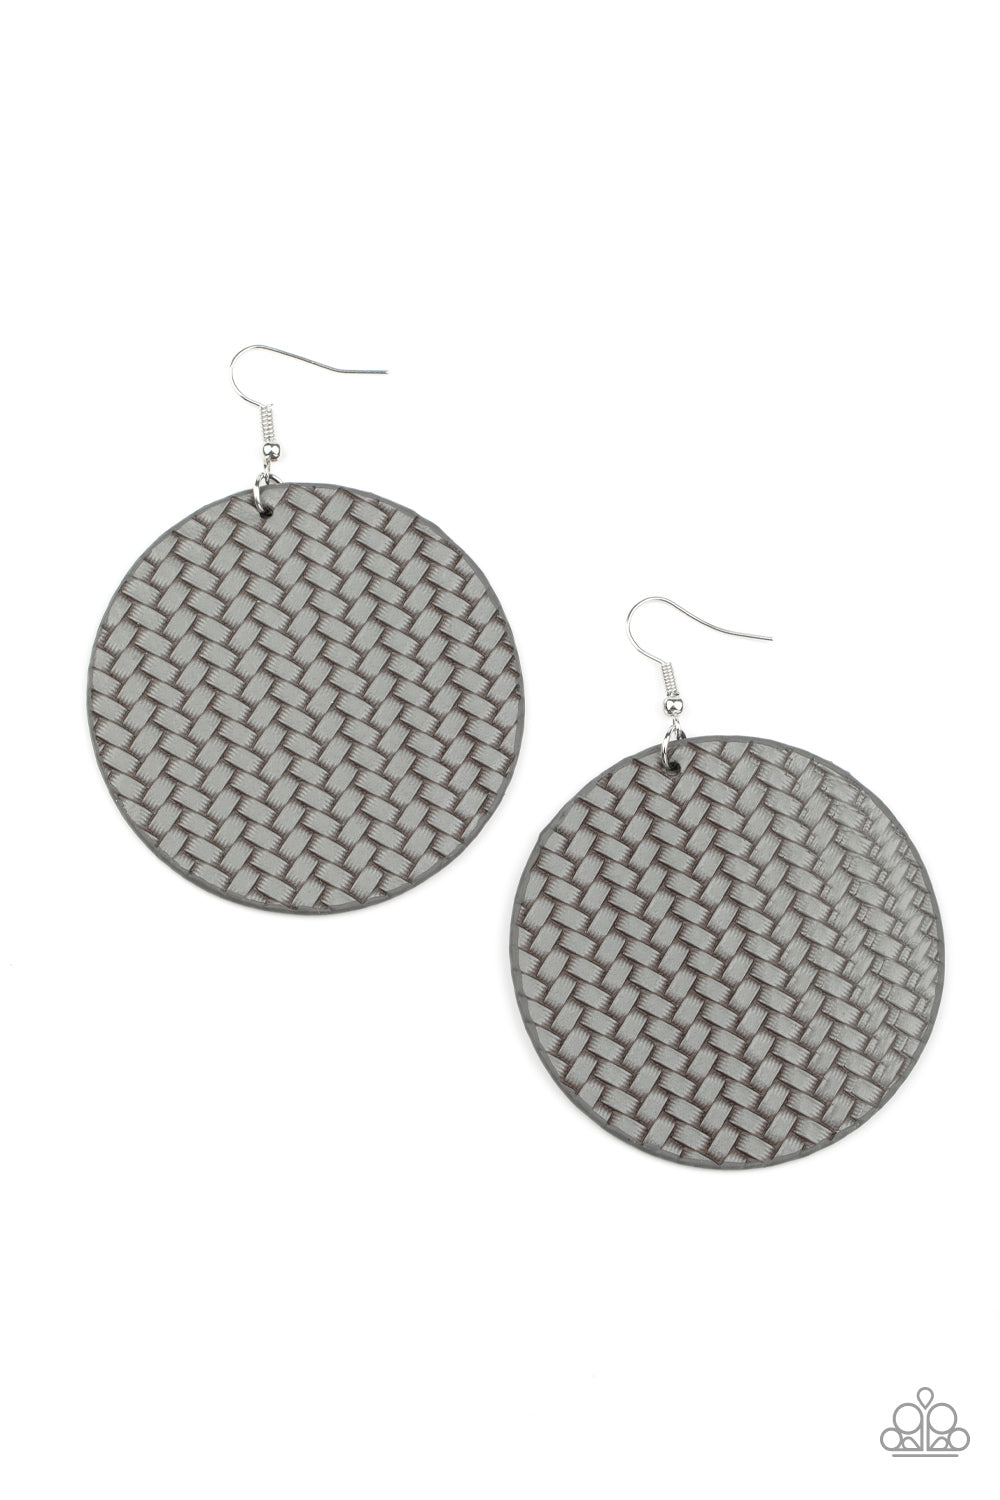 Paparazzi WEAVE Your Mark - Silver Earrings - A Finishing Touch 